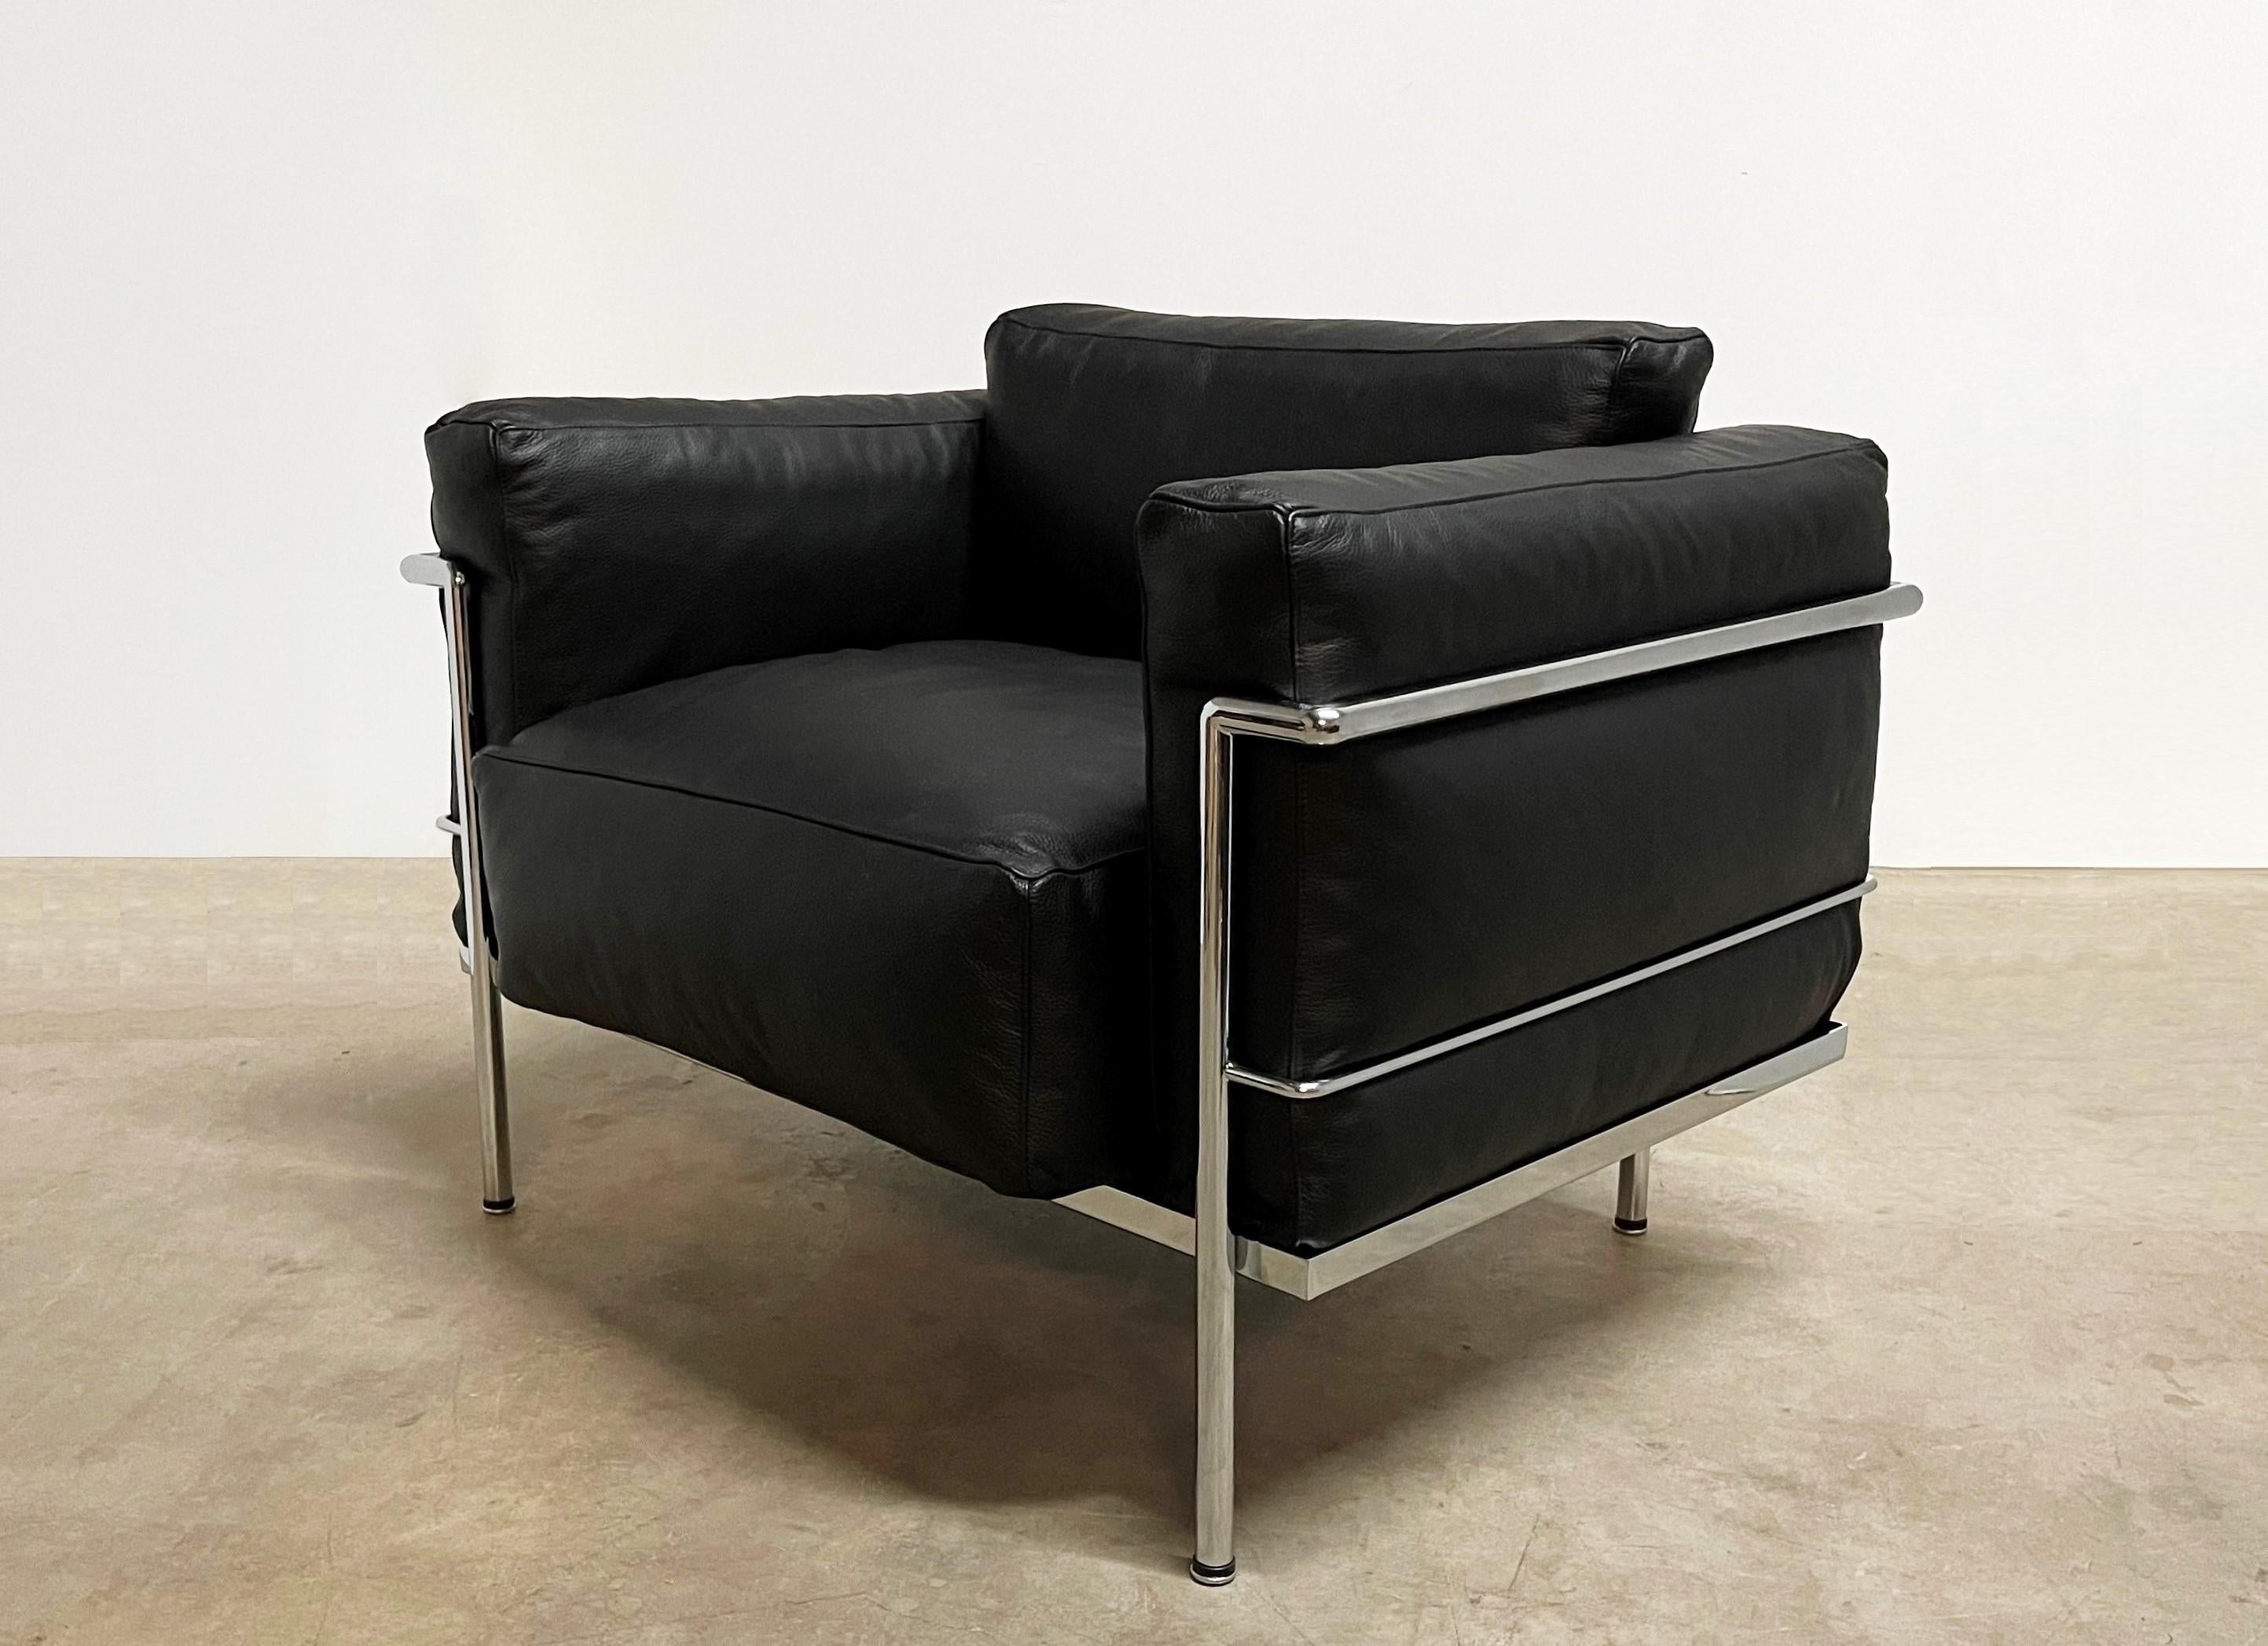 Italian Pierre Jeanneret, Charlotte Perriand & Le Corbusier Grand Comfort Lounge Chairs For Sale